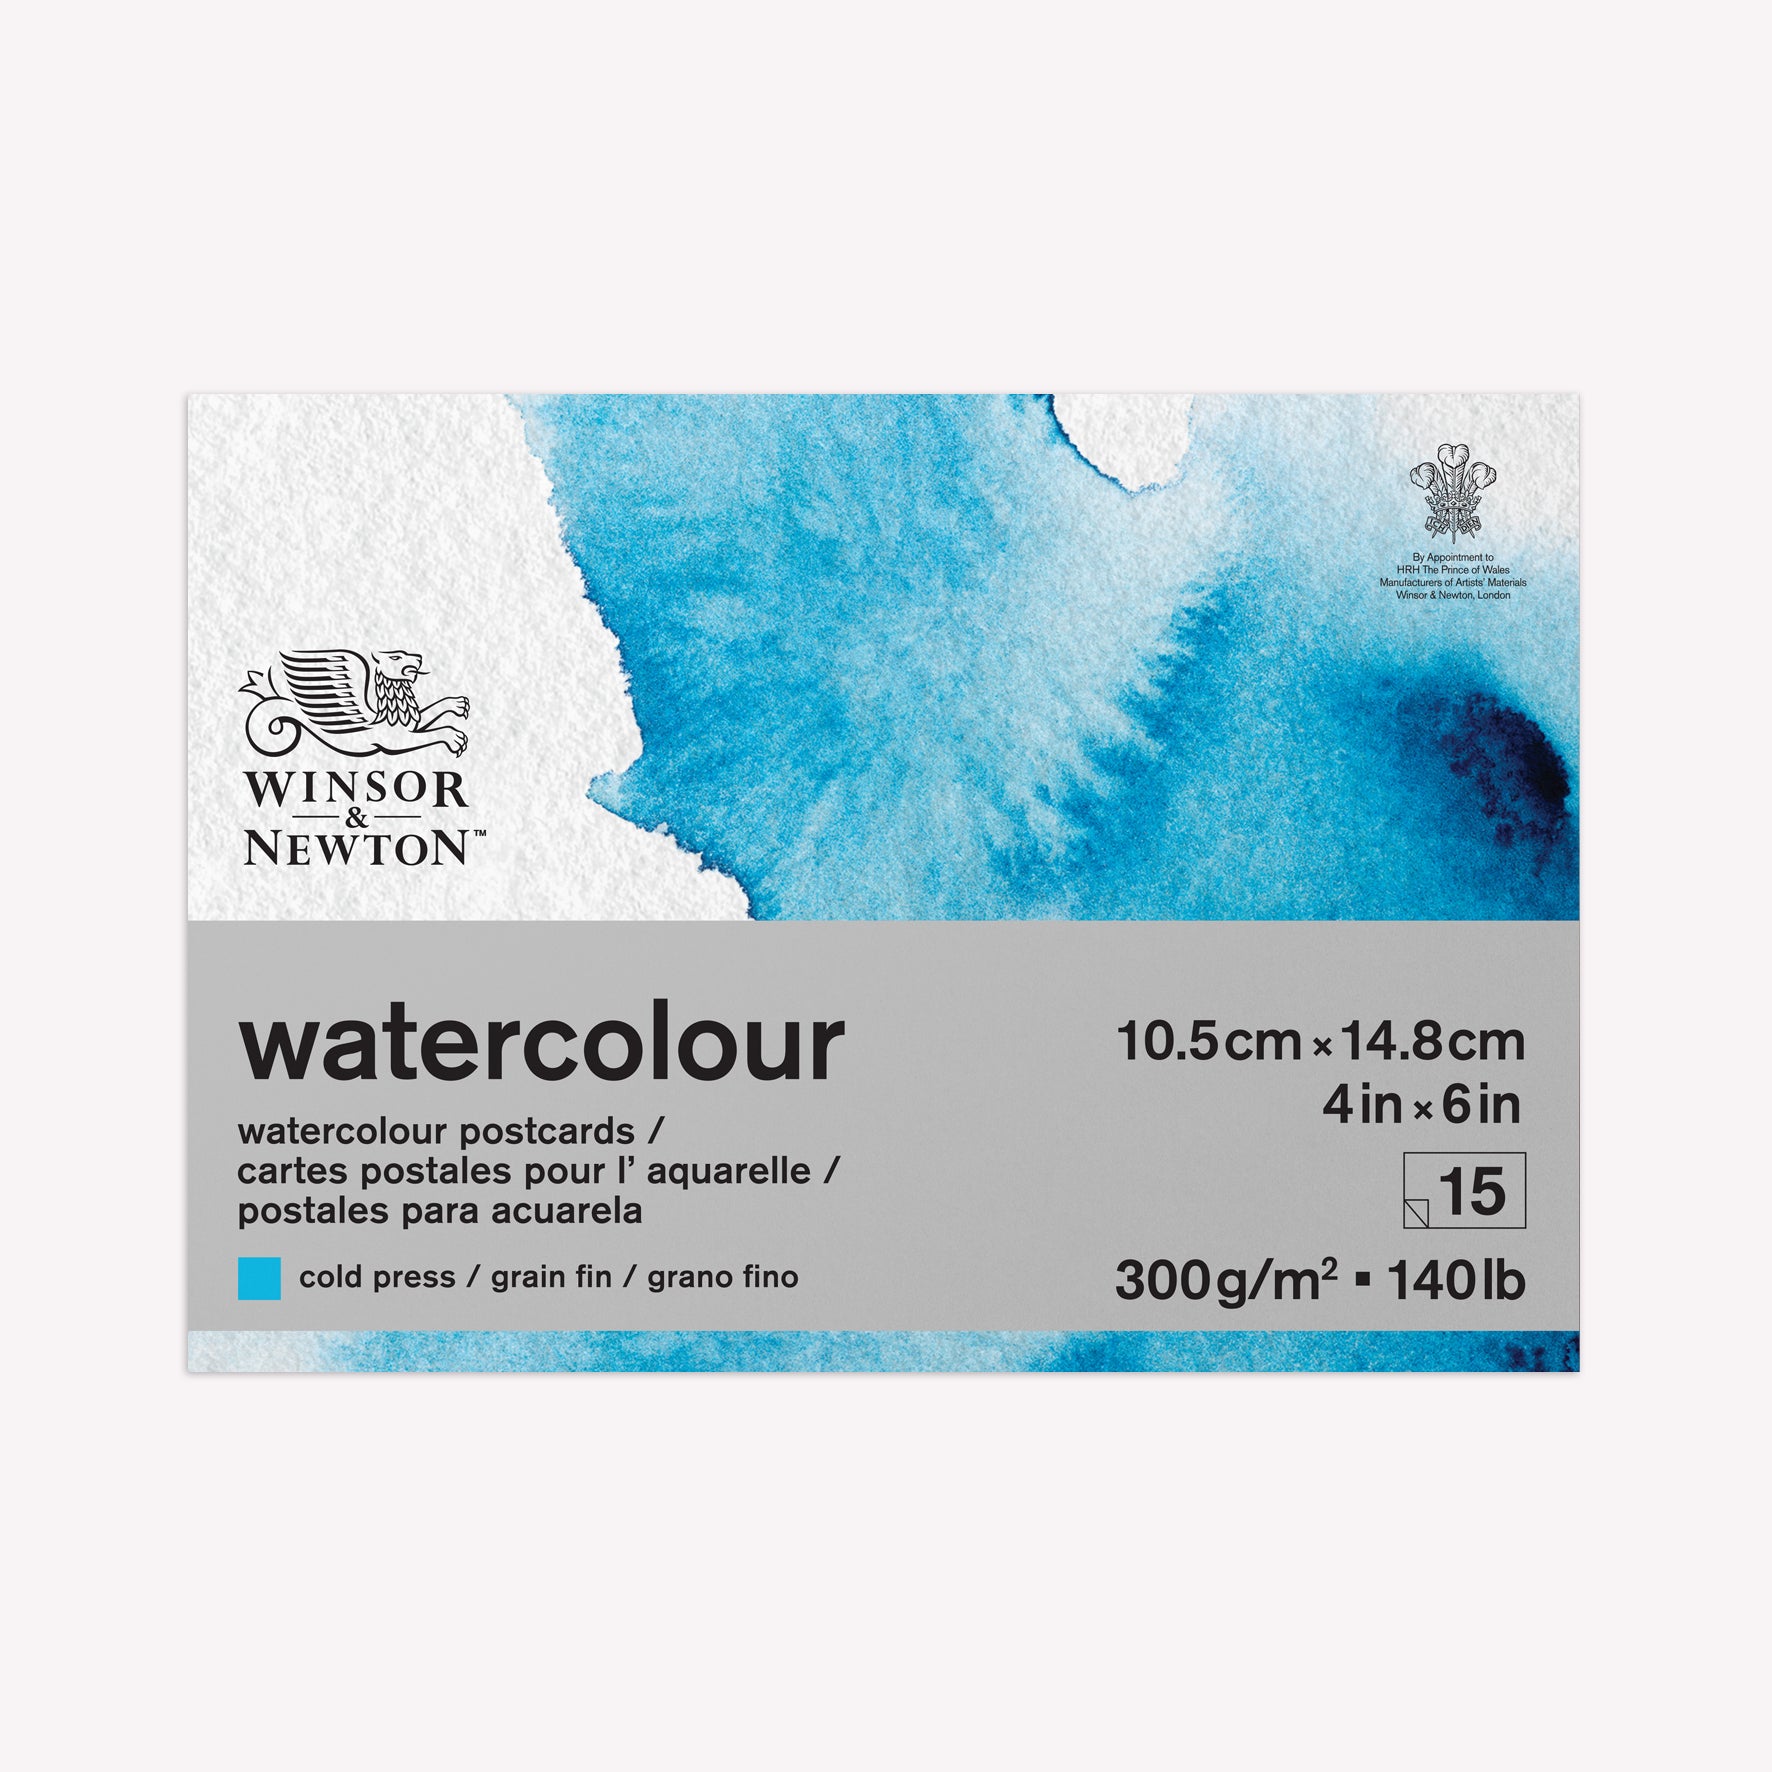 Winsor & Newton Artist A4 Watercolour Postcard Pad. Cover features blue wash of watercolour on a textured white background.  